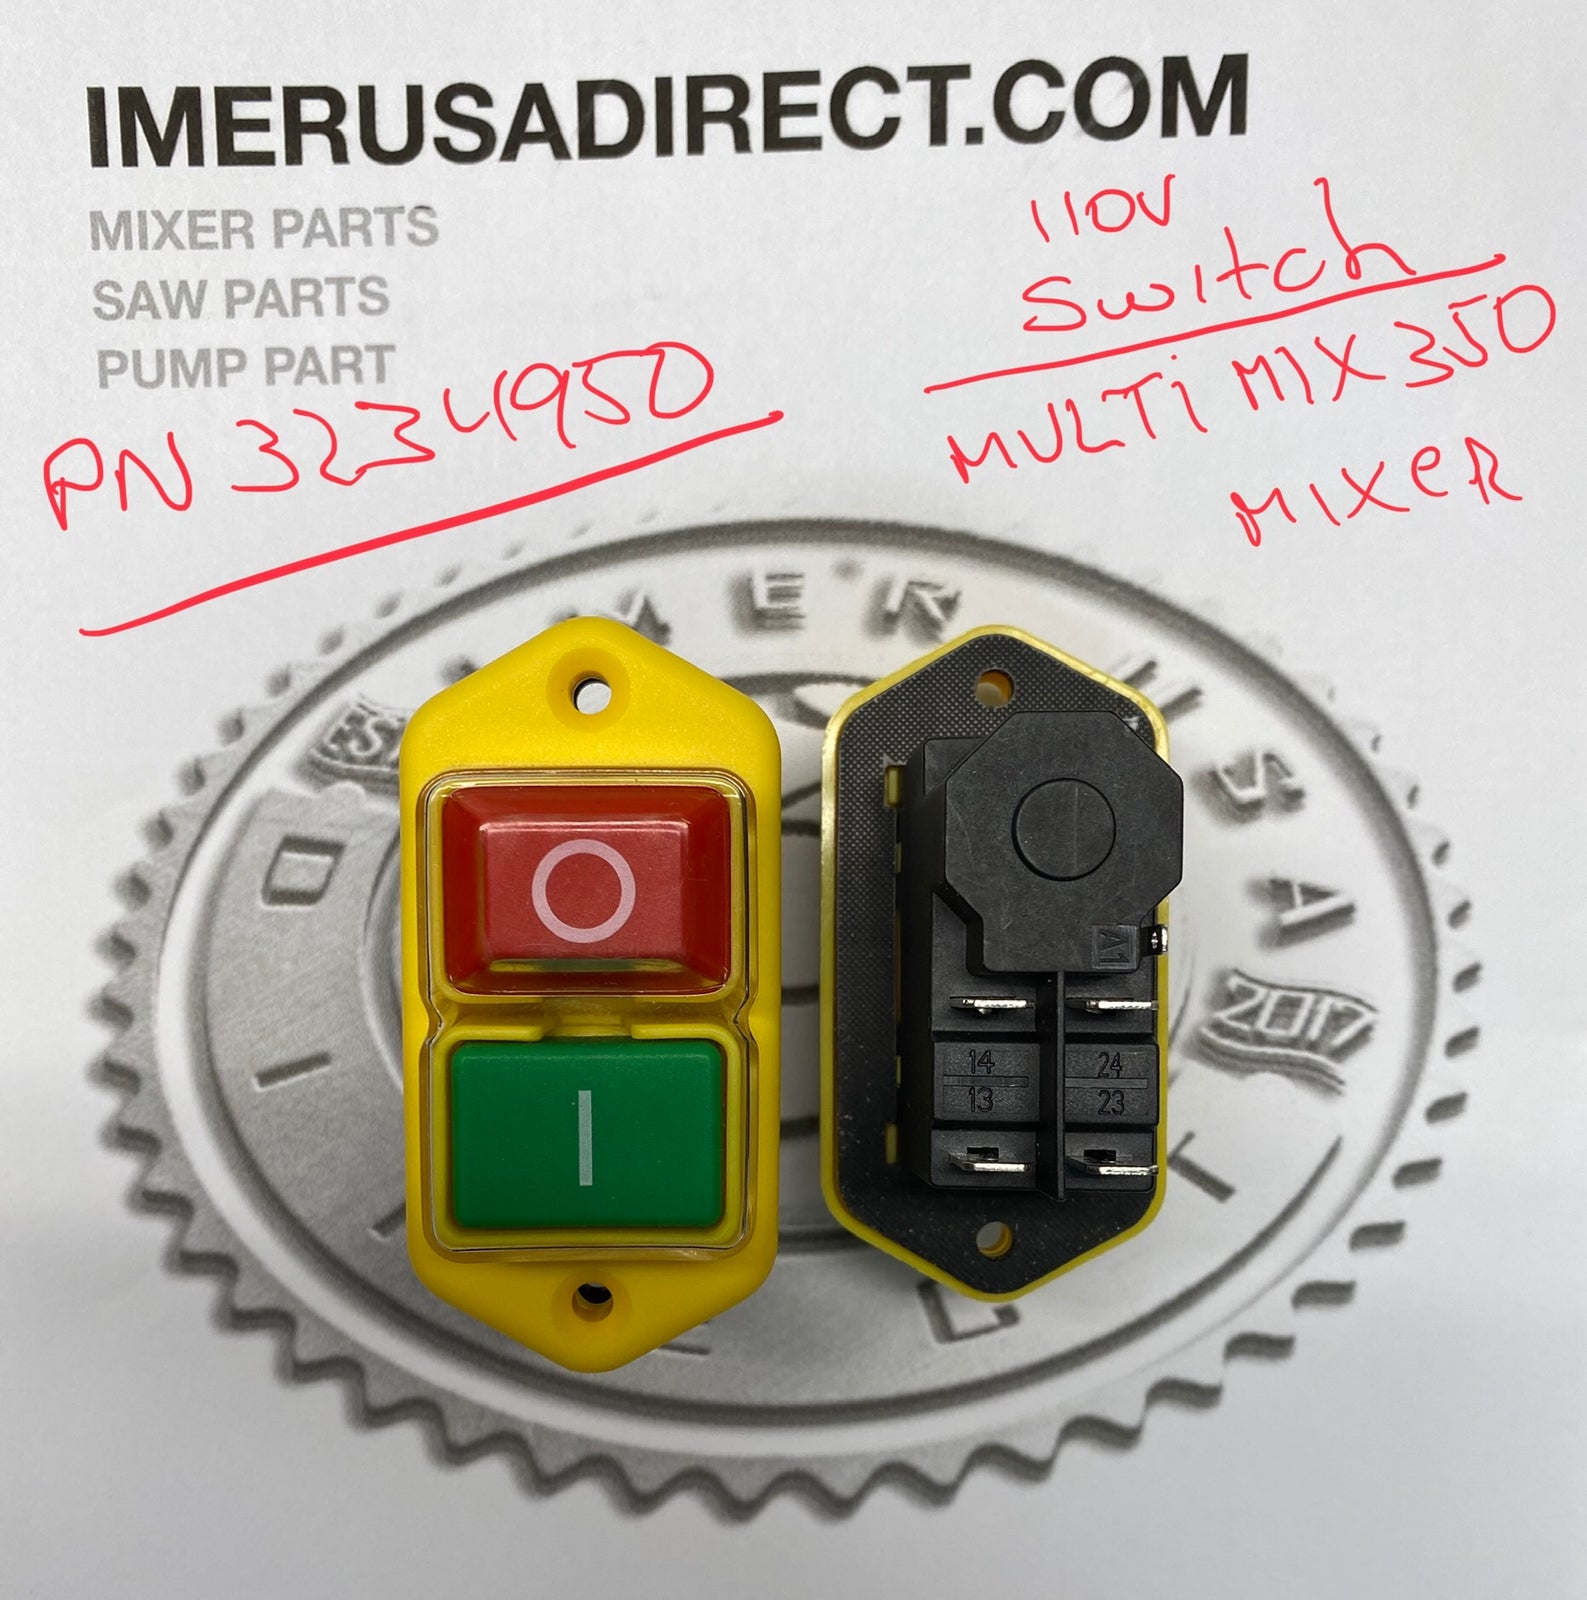 Part Number 3234950 - ON/Off Switch 110 volt for IMER Multi Mix 350 Mixer.